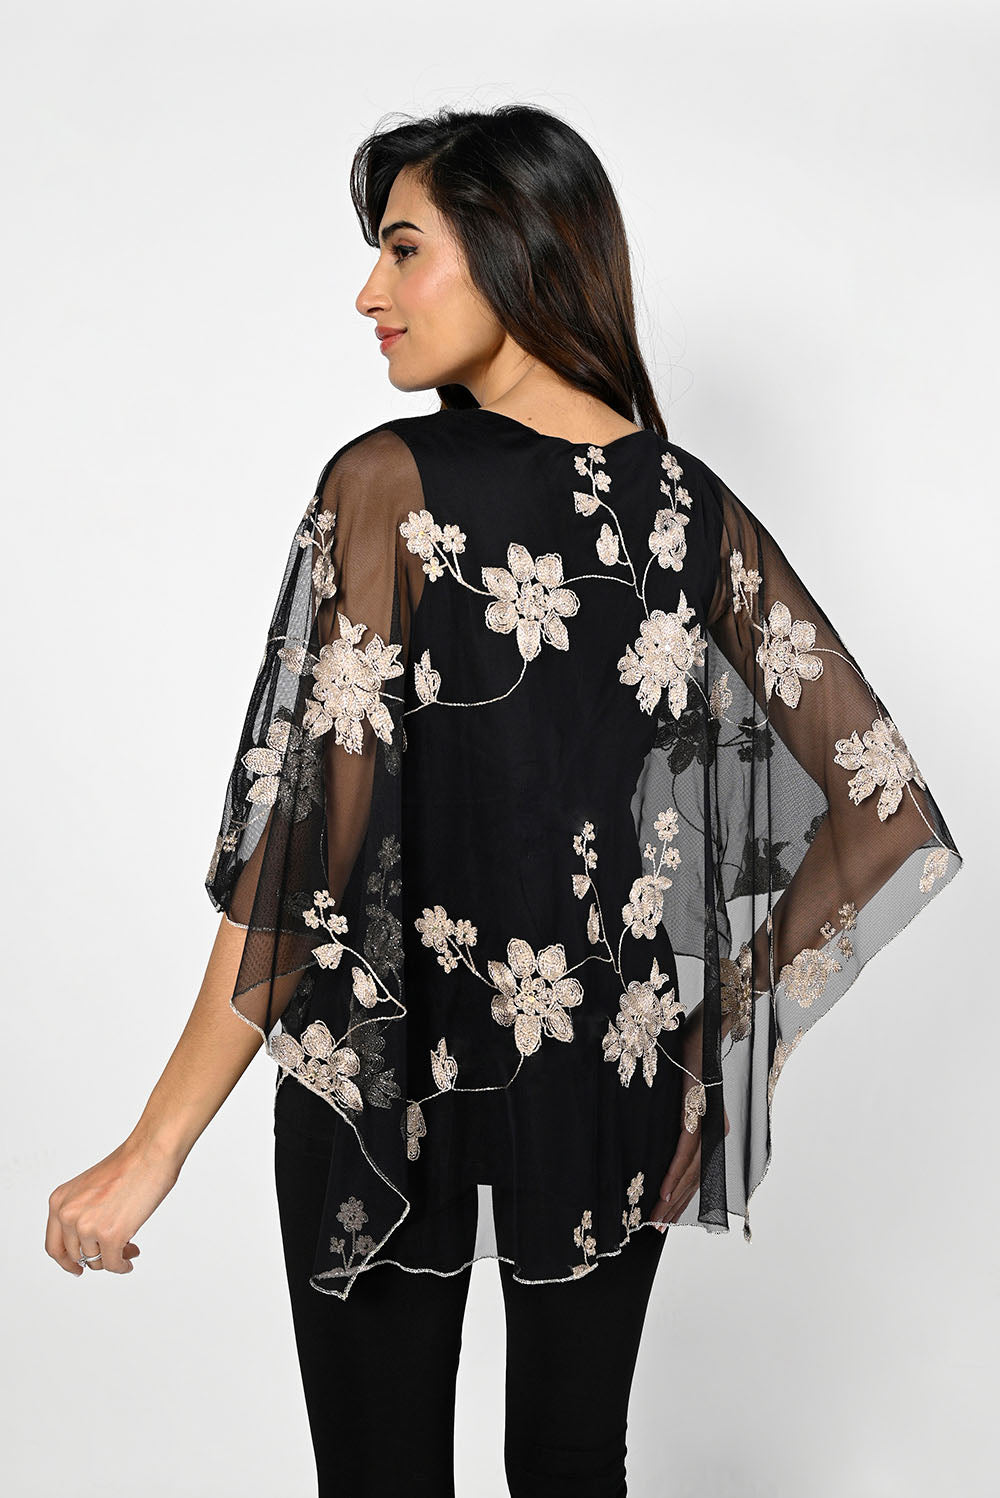 Frank Lyman Black-Gold Knit Top with Floral Print Style 229328